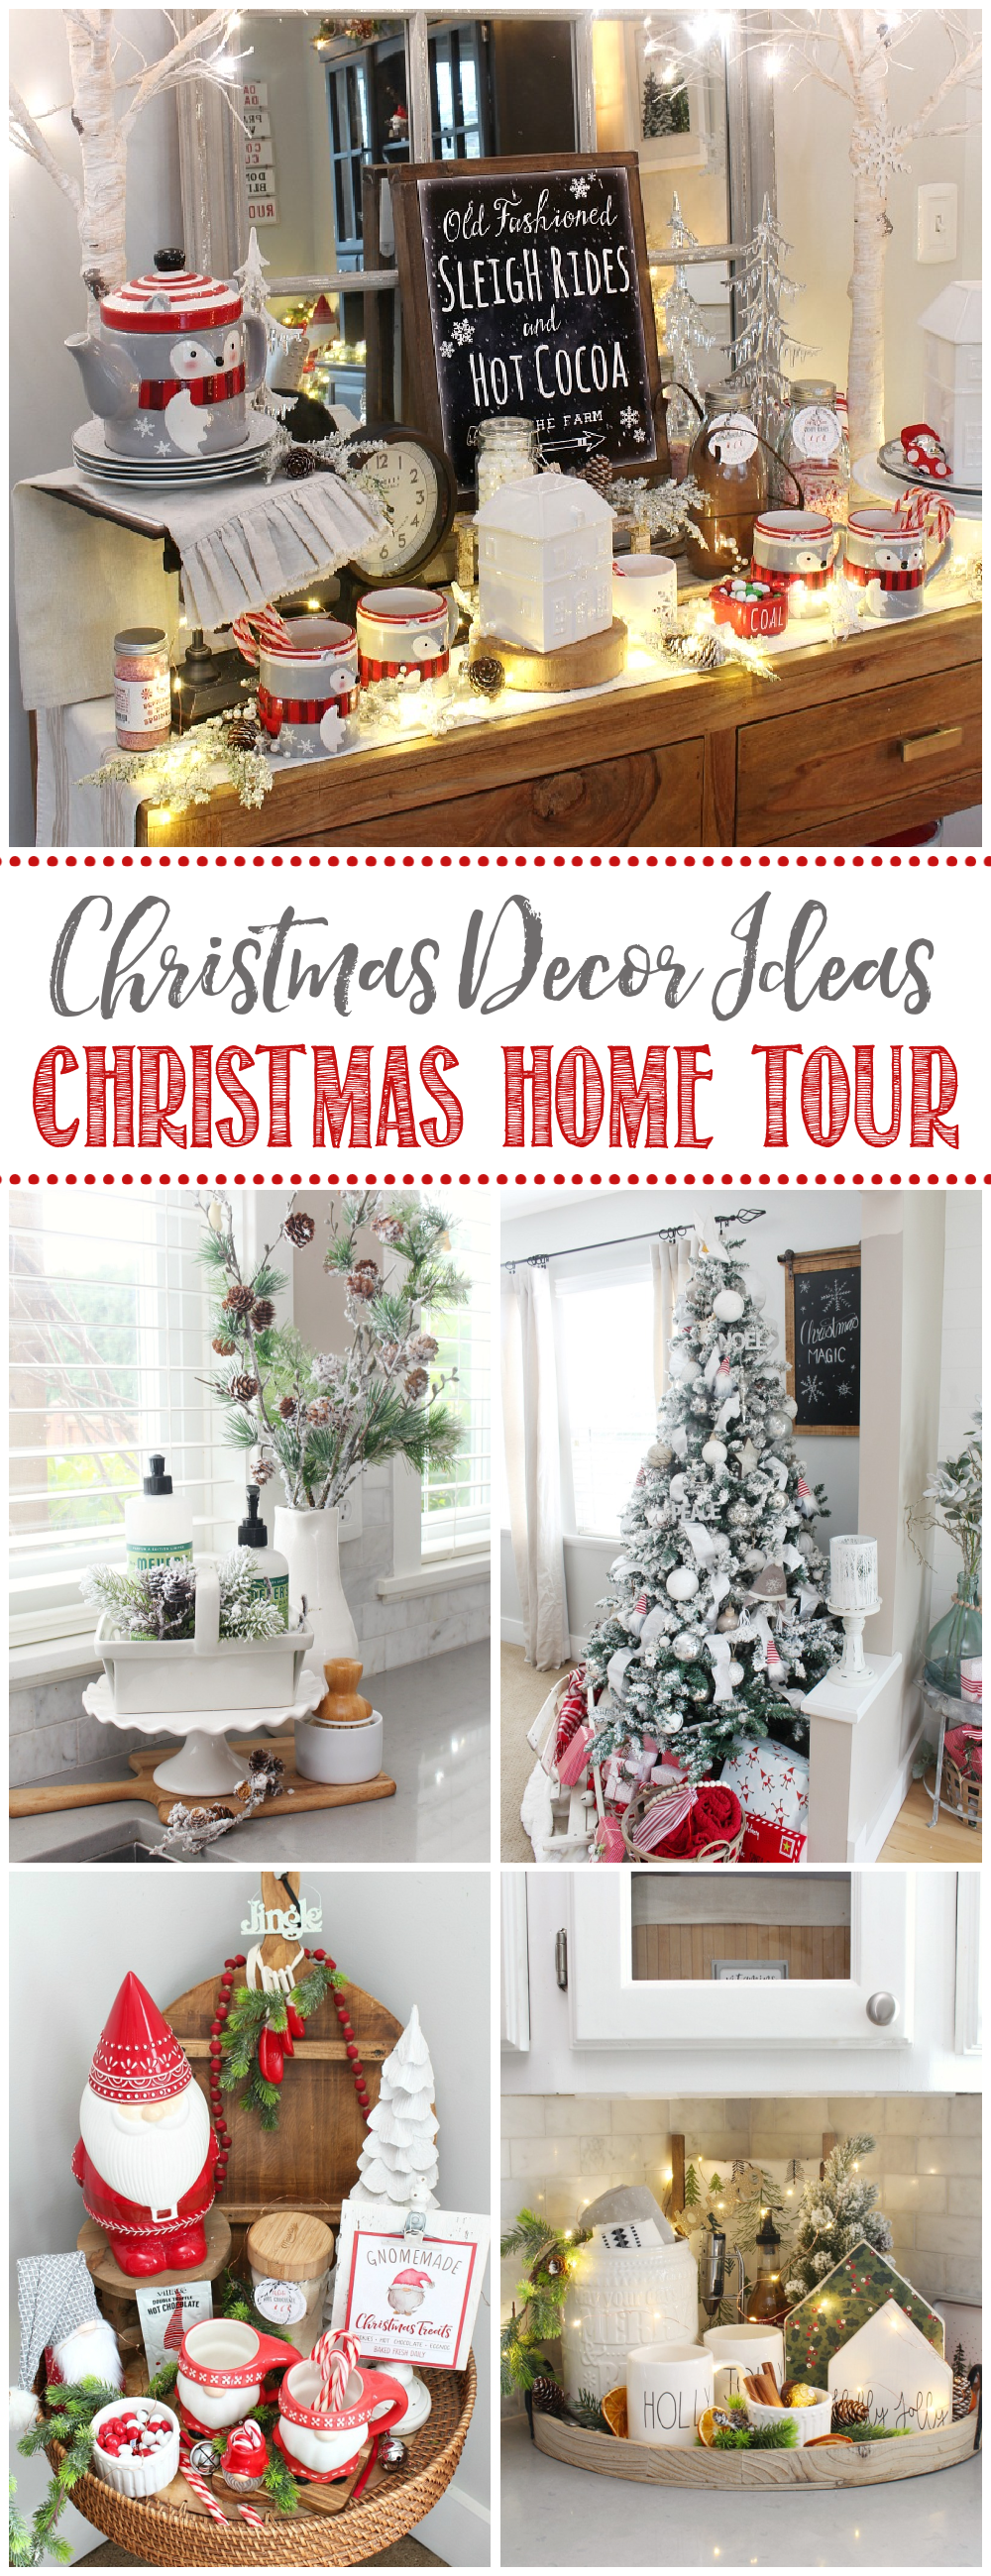 Beautiful Christmas home tour with lots of Christmas decoration ideas.